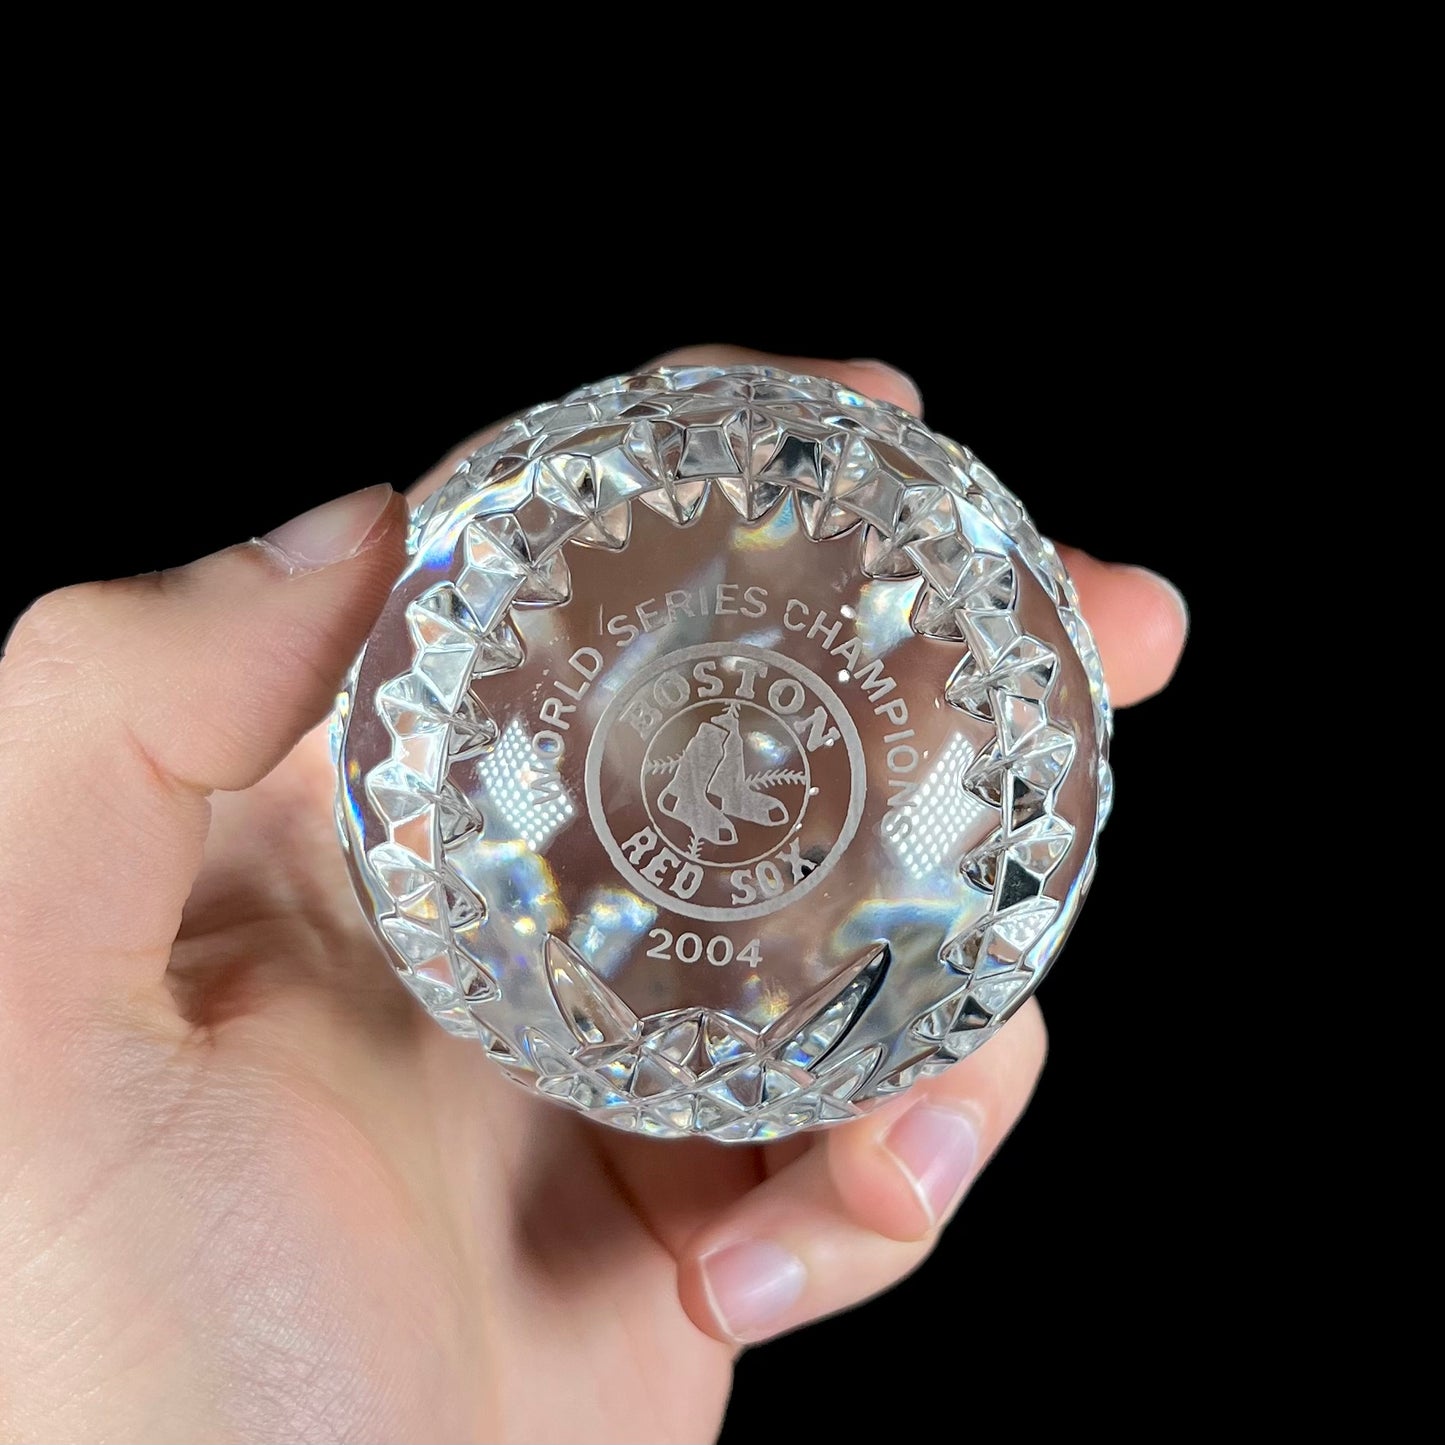 A baseball made from Waterford Crystal commemorating the Boston Red Sox 2004 World Series Championship.